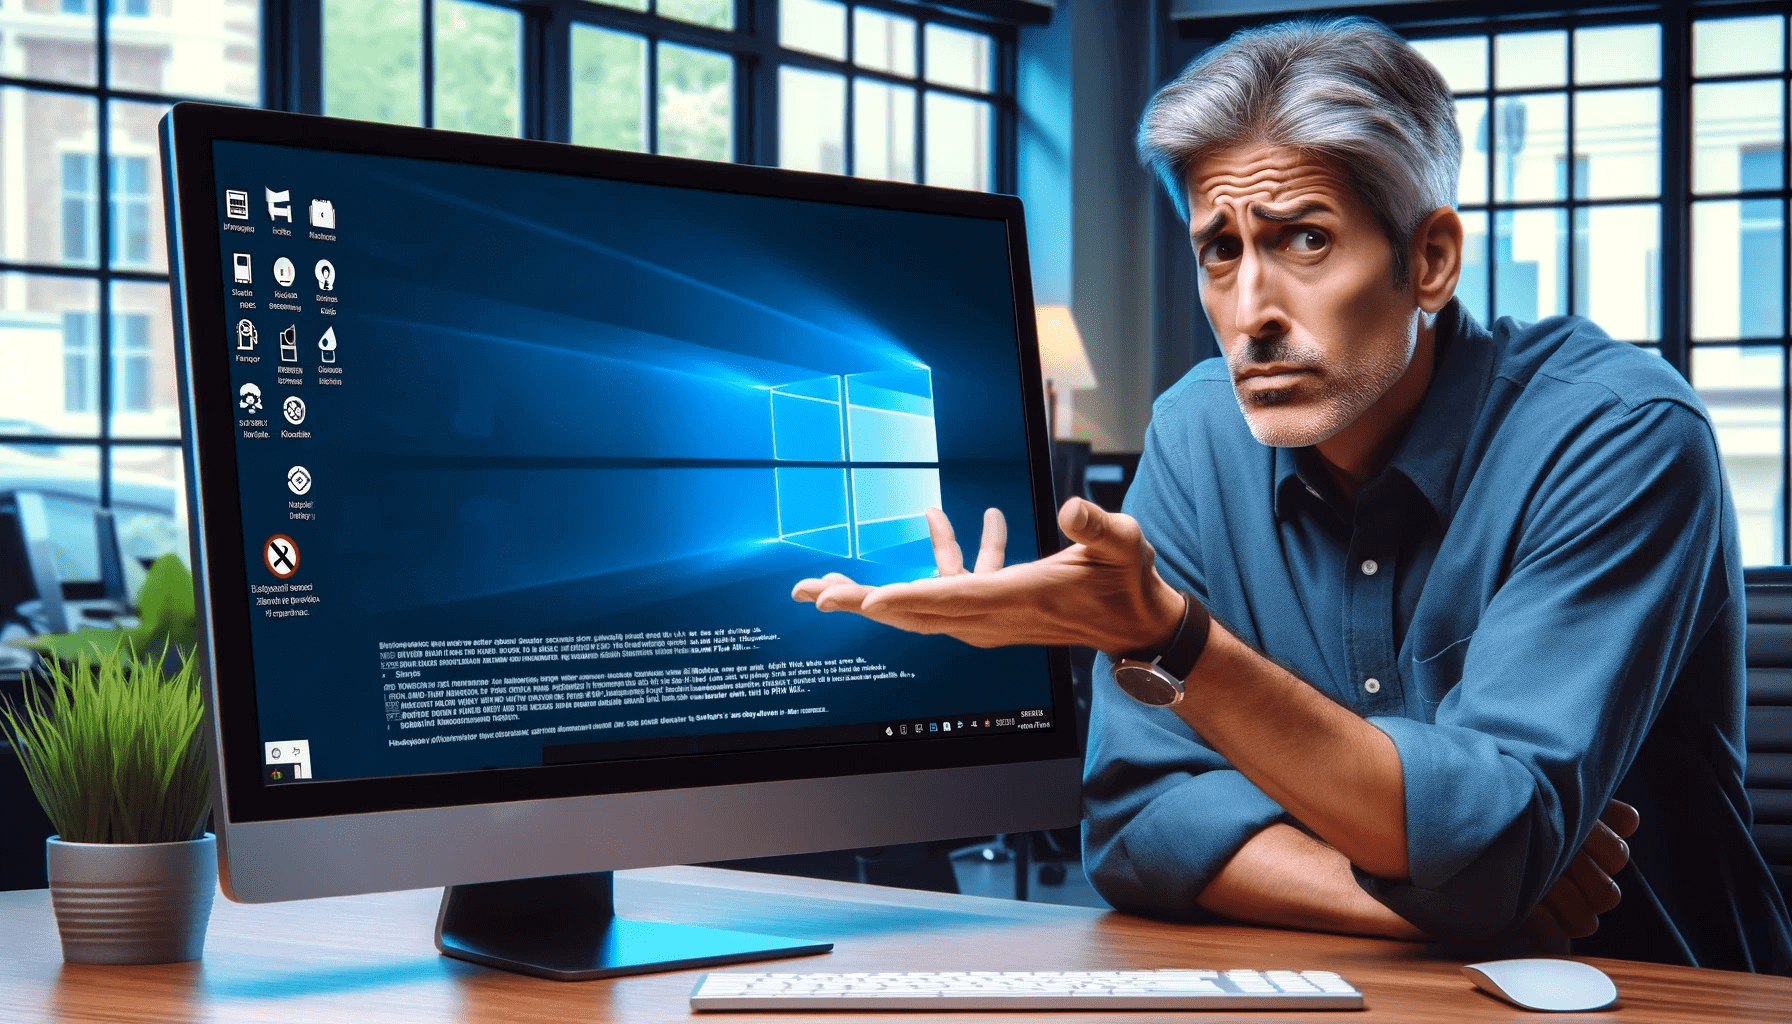 [SOLVED] Main Problems With Windows 10 Installation